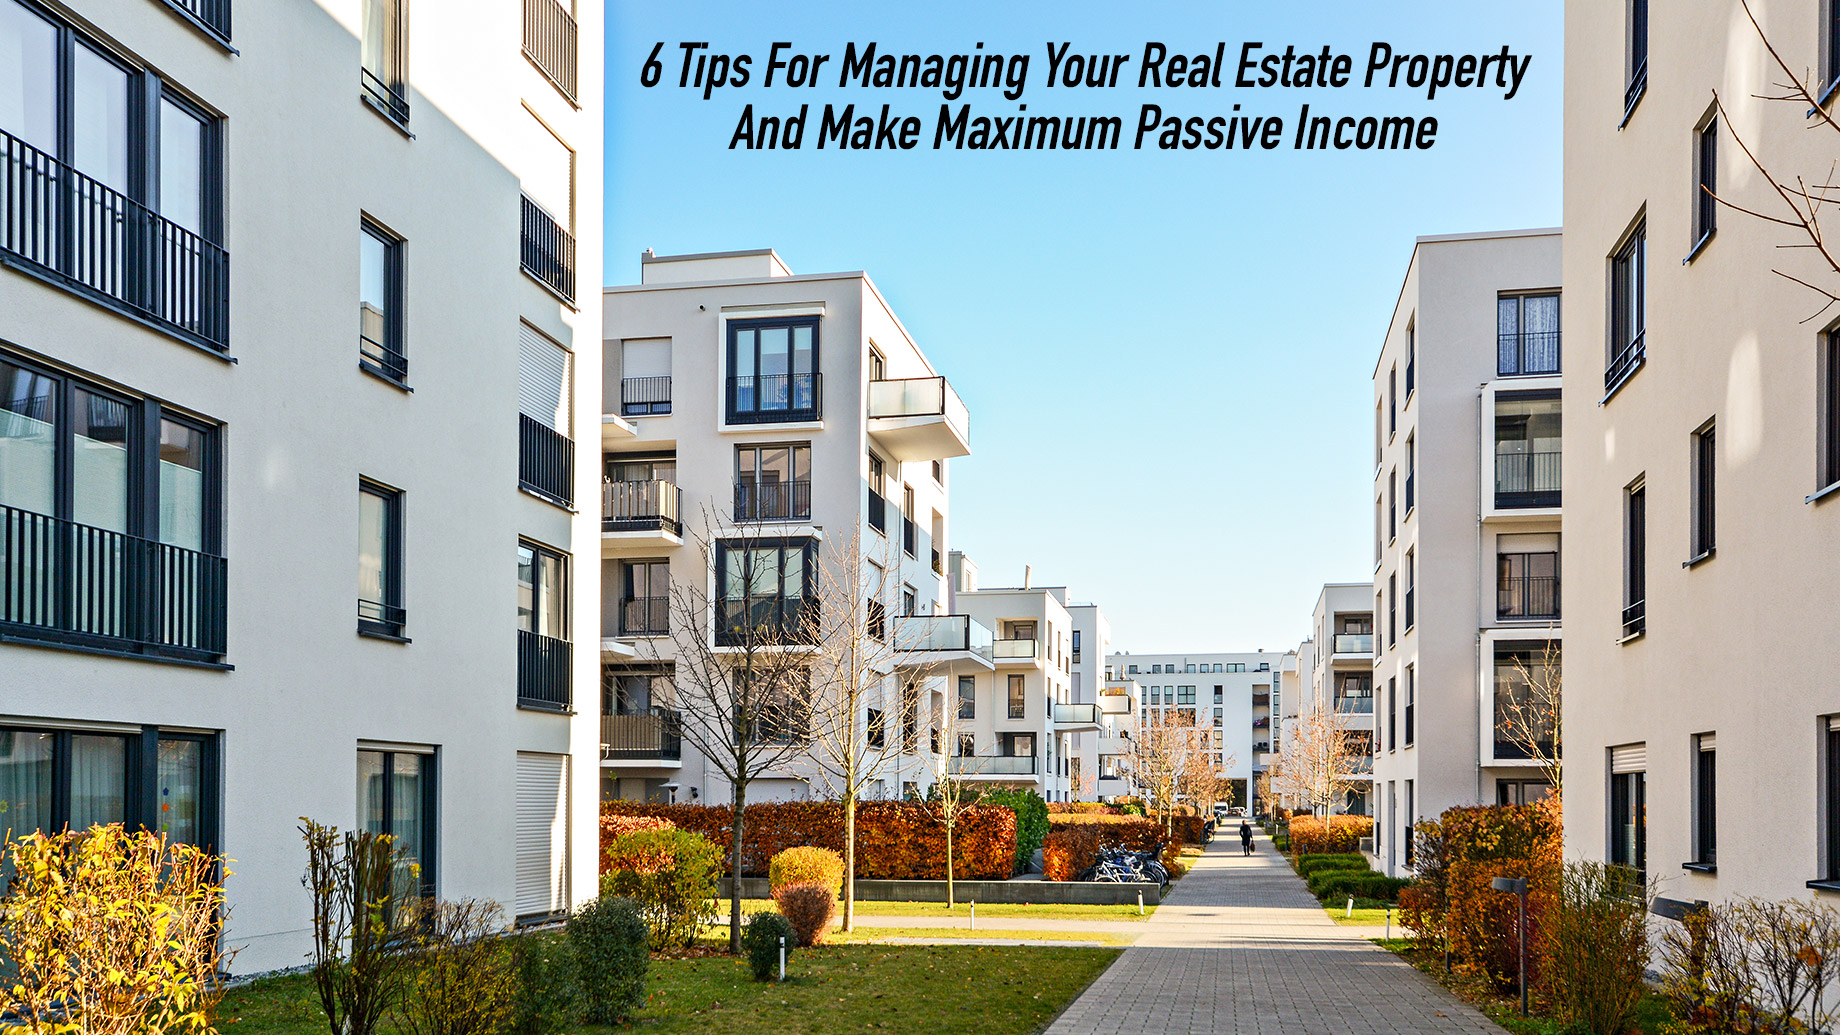 6 Tips For Managing Your Real Estate Property And Make Maximum Passive Income